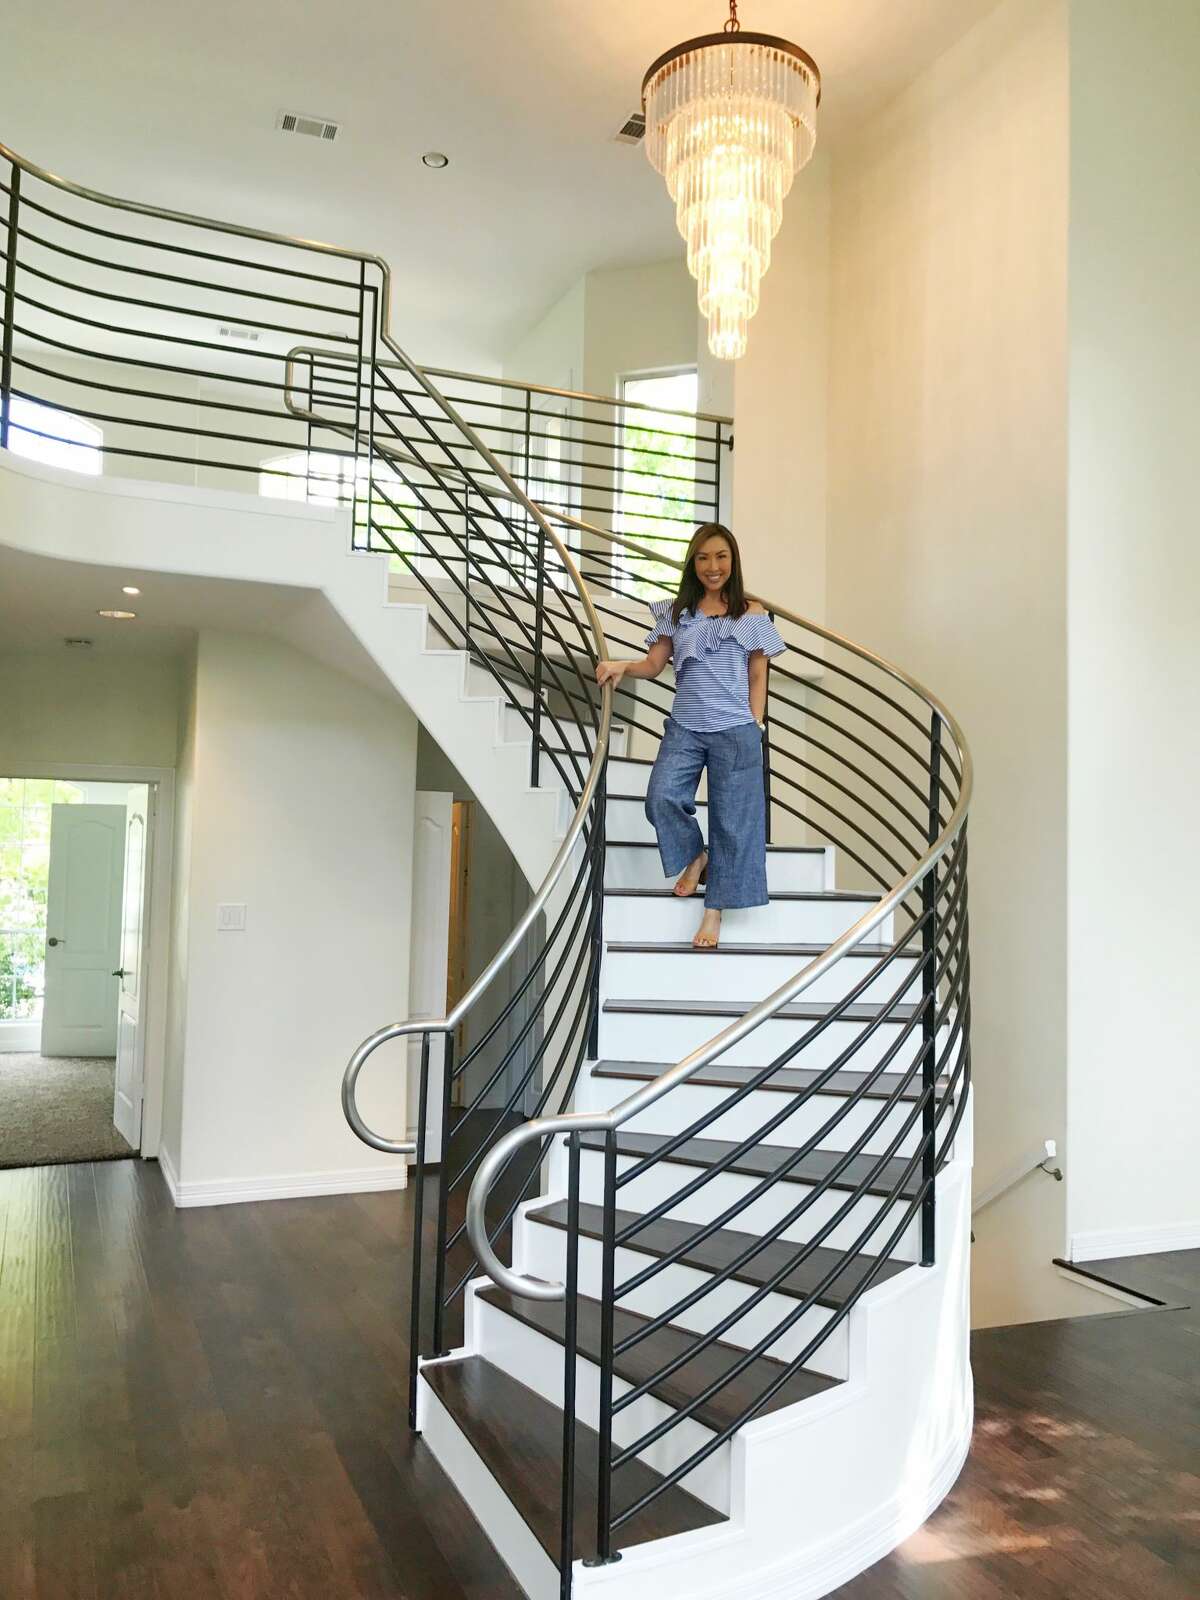 Lily Jang inside one of her million-dollar listings featured on KPRC-2's "Home Showcase."